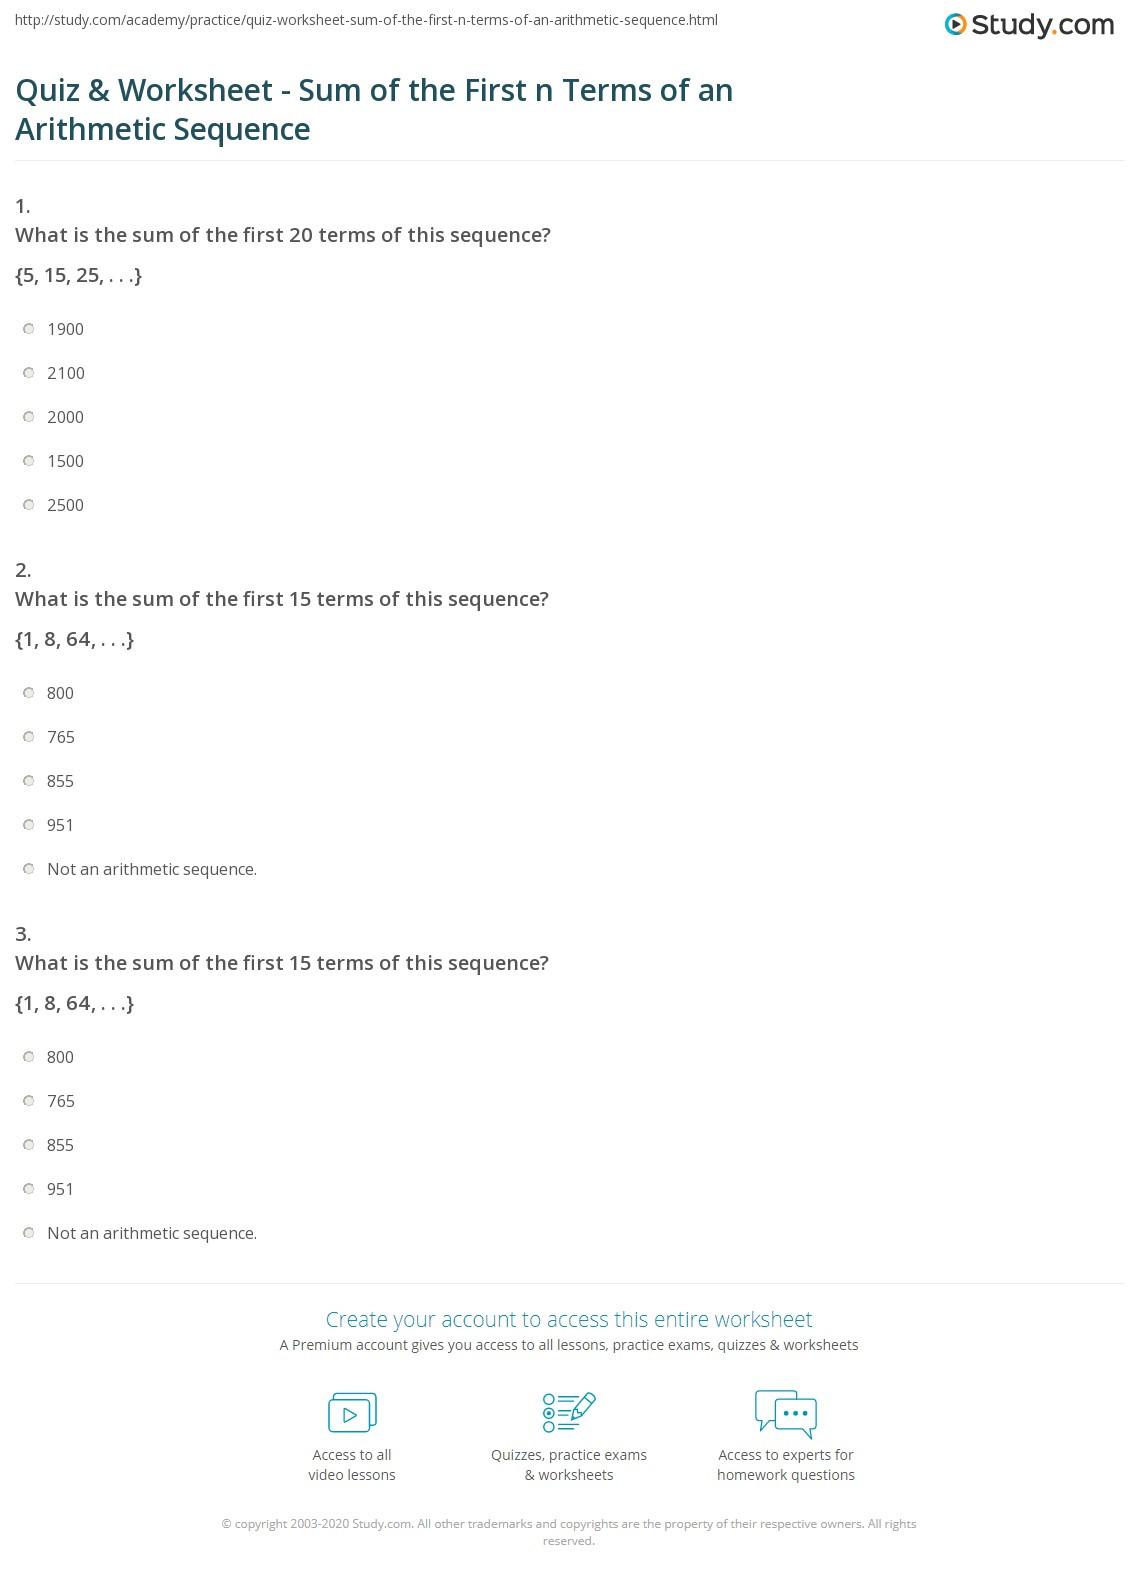 Arithmetic Sequence Worksheet Answers Quiz &amp; Worksheet Sum Of the First N Terms Of An Arithmetic